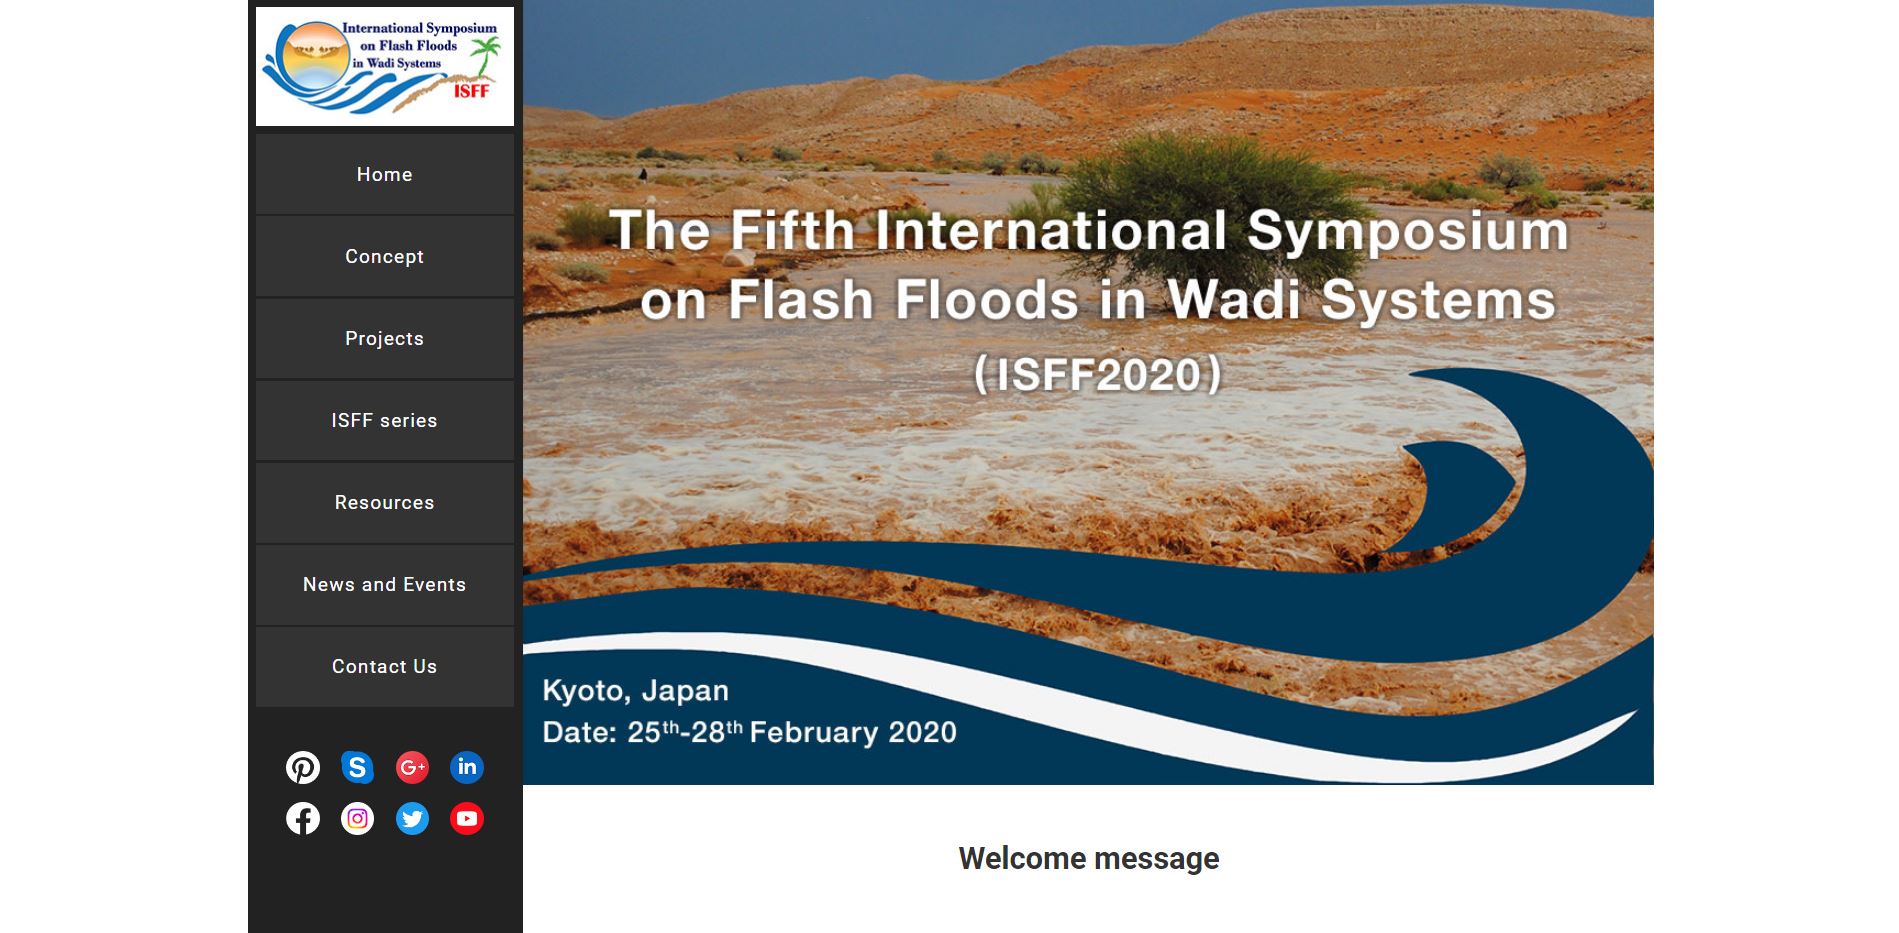 The Fifth International Symposium on Flash Floods in Wadi Systems (ISFF2020)